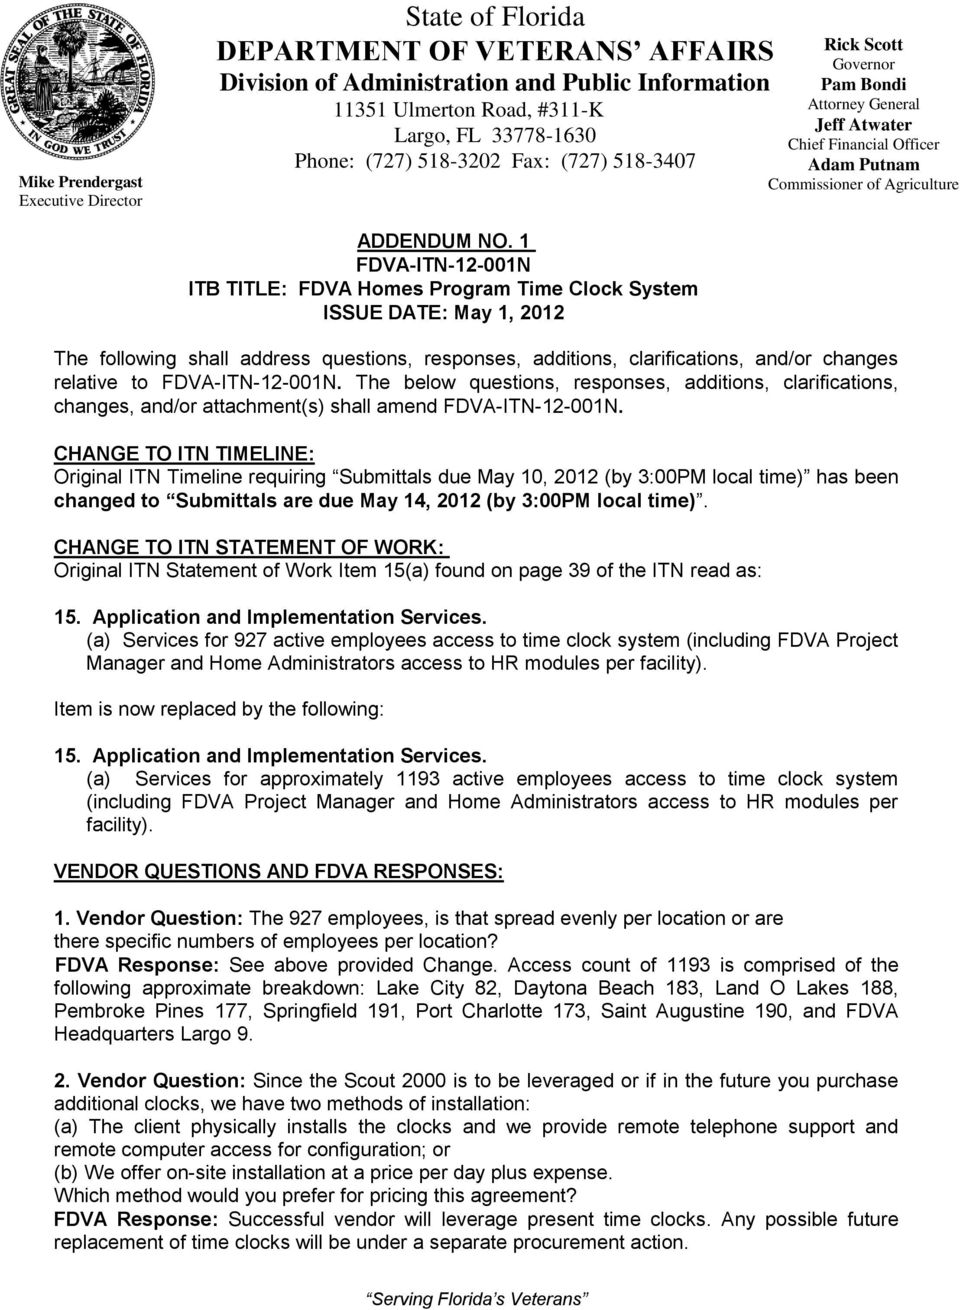 1 FDVA-ITN-12-001N ITB TITLE: FDVA Homes Program Time Clock System ISSUE DATE: May 1, 2012 The following shall address questions, responses, additions, clarifications, and/or changes relative to